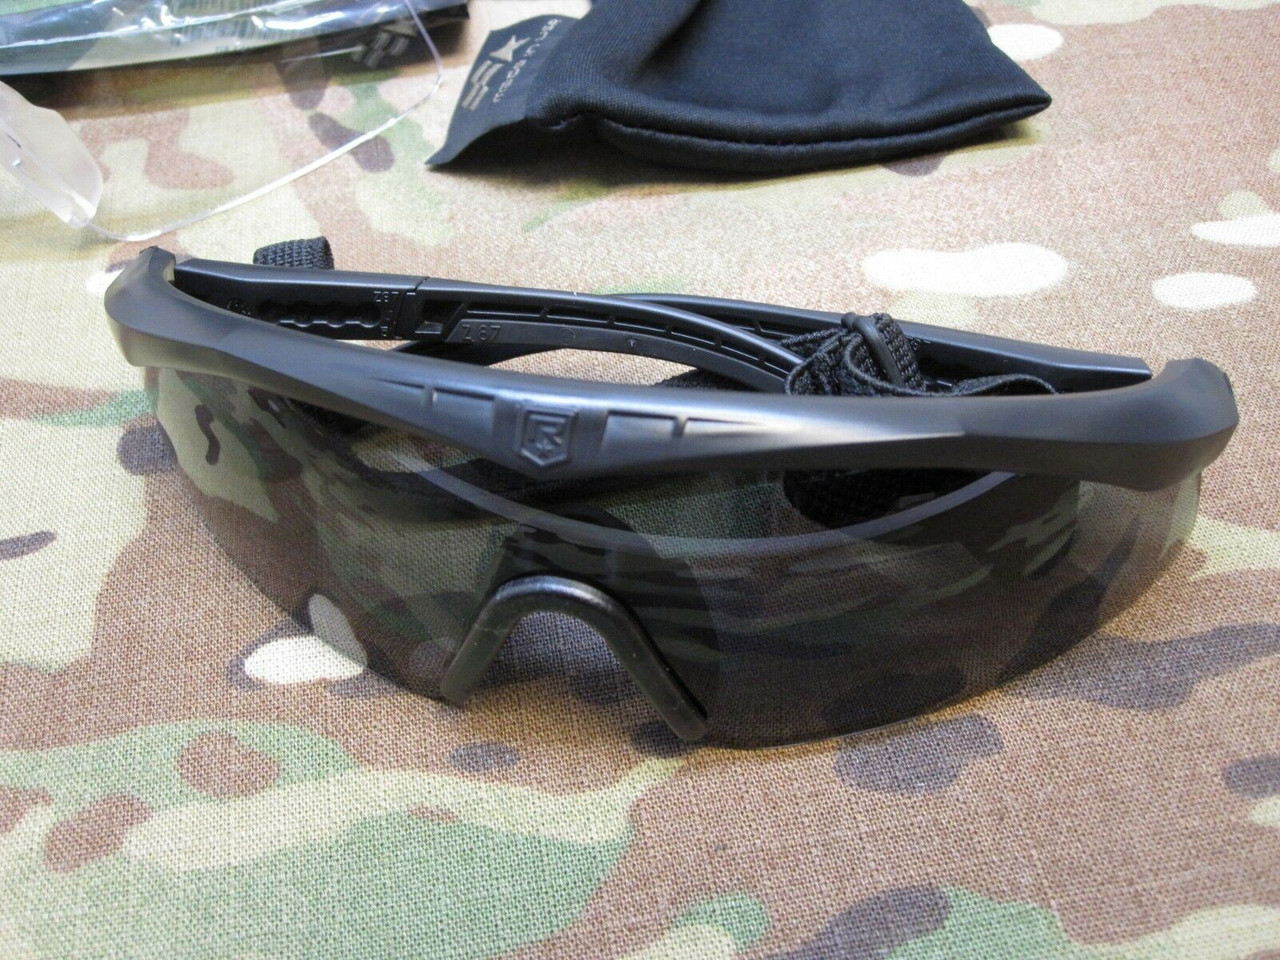 NEW MILITARY EYE PRO REVISION SAWFLY US ARMY SHATTER PROOF SUNGLASSES REGULAR